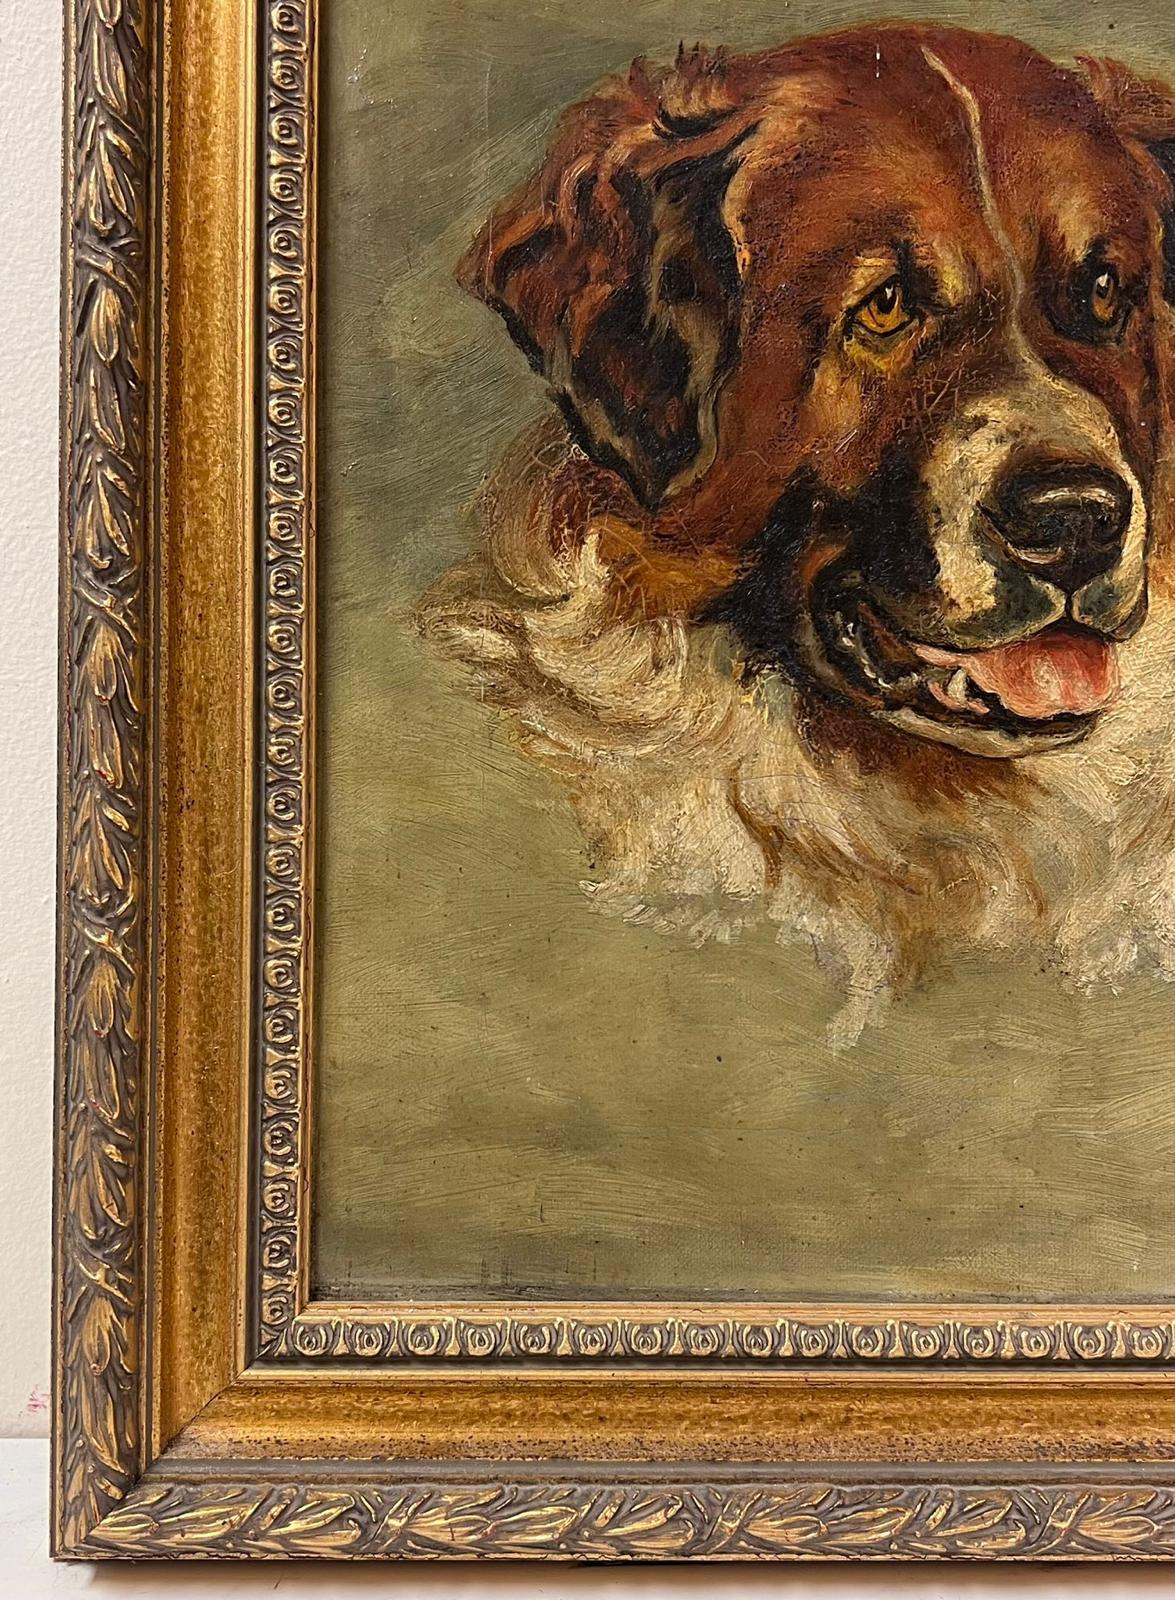 Head Portrait of a Dog St. Bernard? Antique English Oil Painting on Canvas - Brown Portrait Painting by Antique English artist